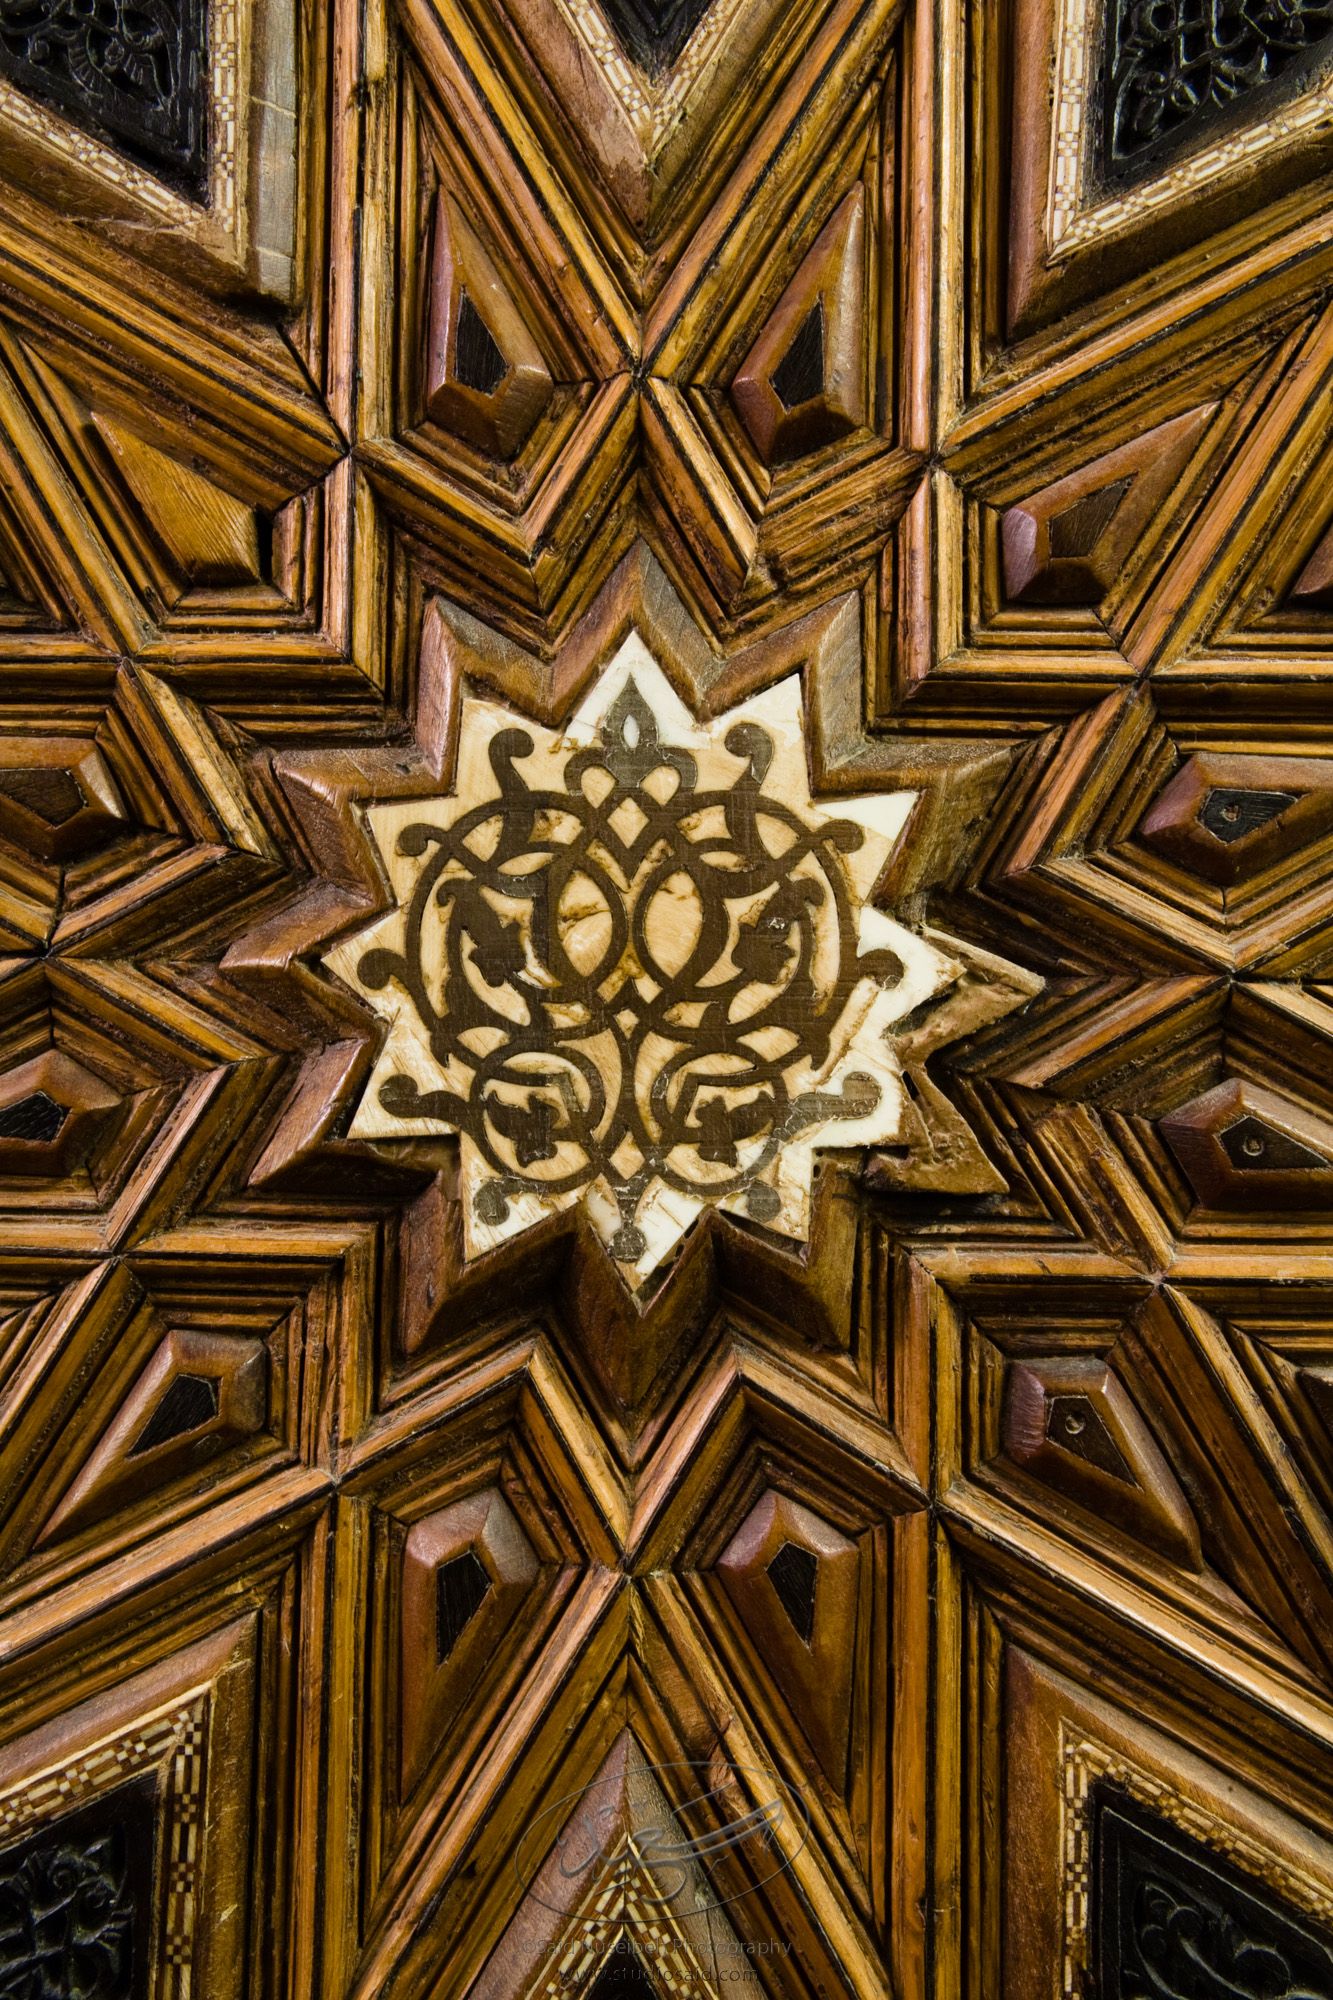 "Symmetrical Floral Interlace inside Dodecagons. Minbar, Carved Woodwork and Inlay Detail"The late-13th / early-14th c. Mamluk minbar, or pulpit, of Sultan al-Nasir Muhammad, the ninth Mamluk Sultan from Cairo and son of Qalawun. The minbar was located in the Umayyad Mosque in Aleppo, Haleb, prior to its damage and disappearance in May 2013.